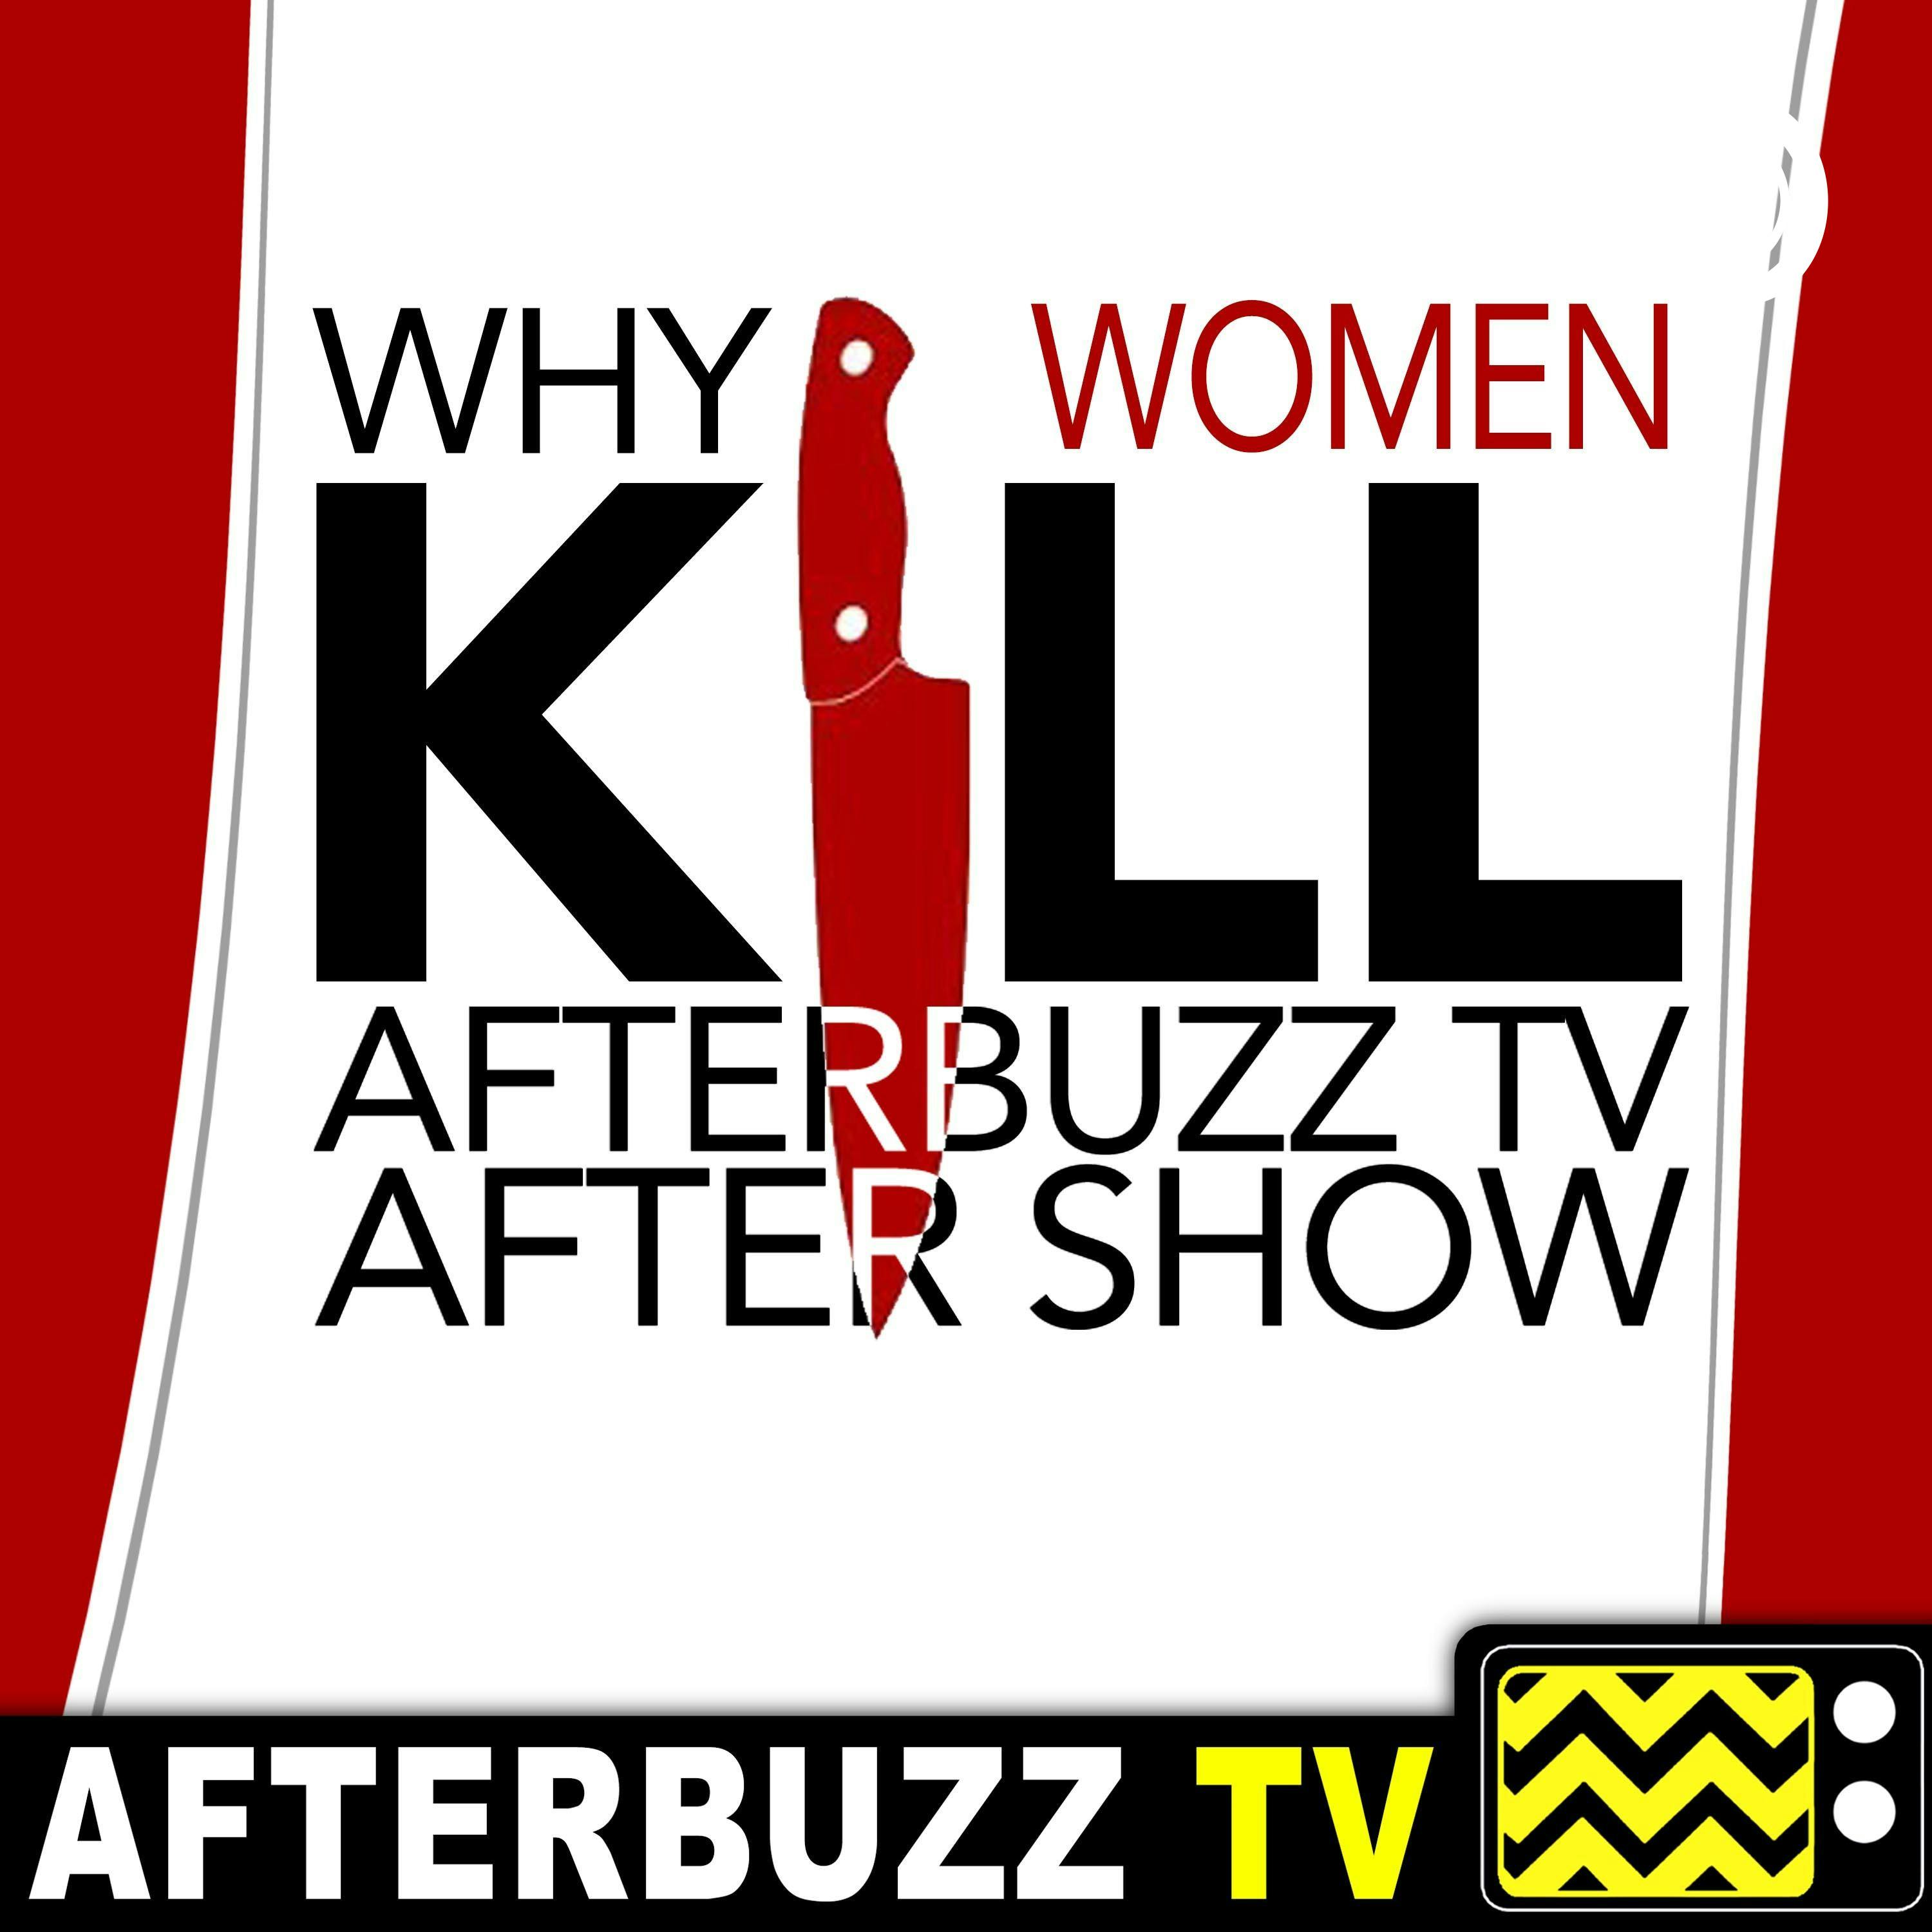 David Banks Guests on ”There’s No Crying in Murder” Season 1 Episode 5 ’Why Women Kill’ Review